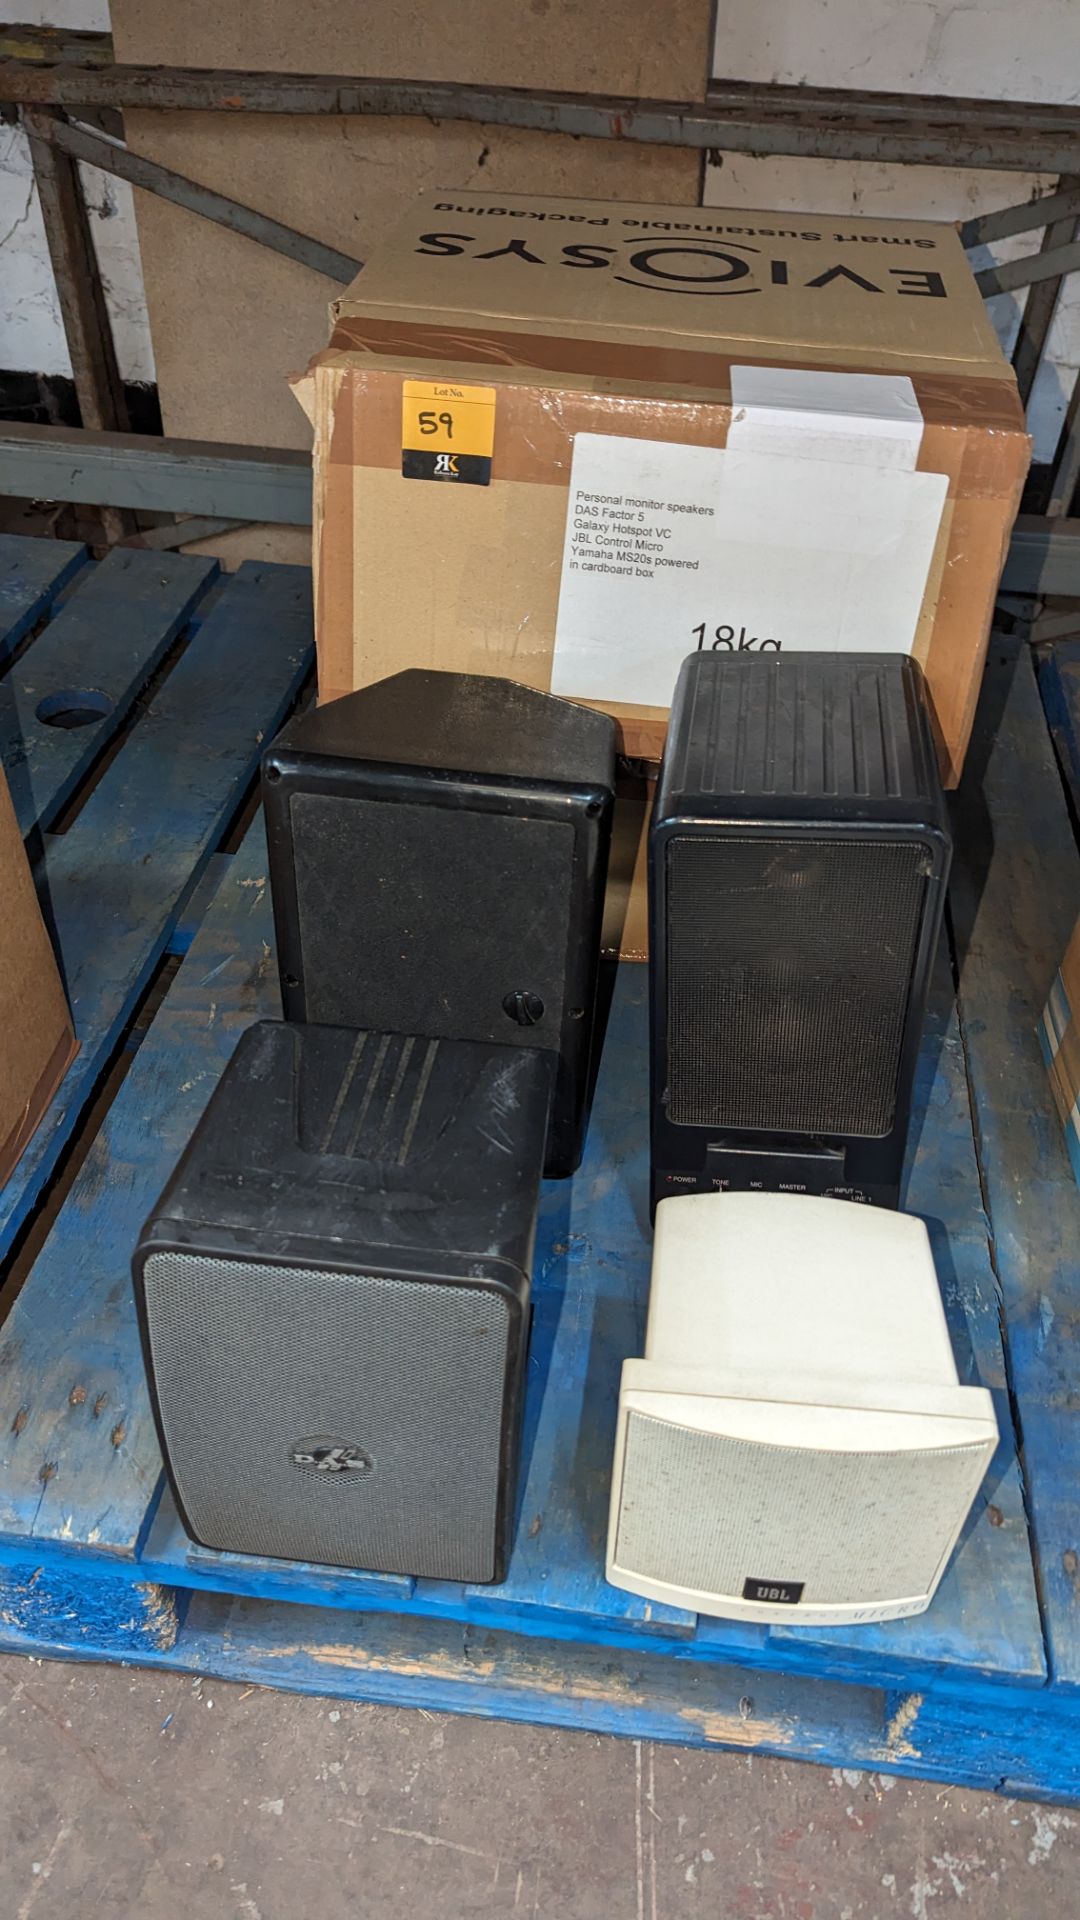 4 off assorted personal monitor speakers comprising DAS Factor 5, Galaxy hotspot VC, JBL control mic - Image 2 of 12